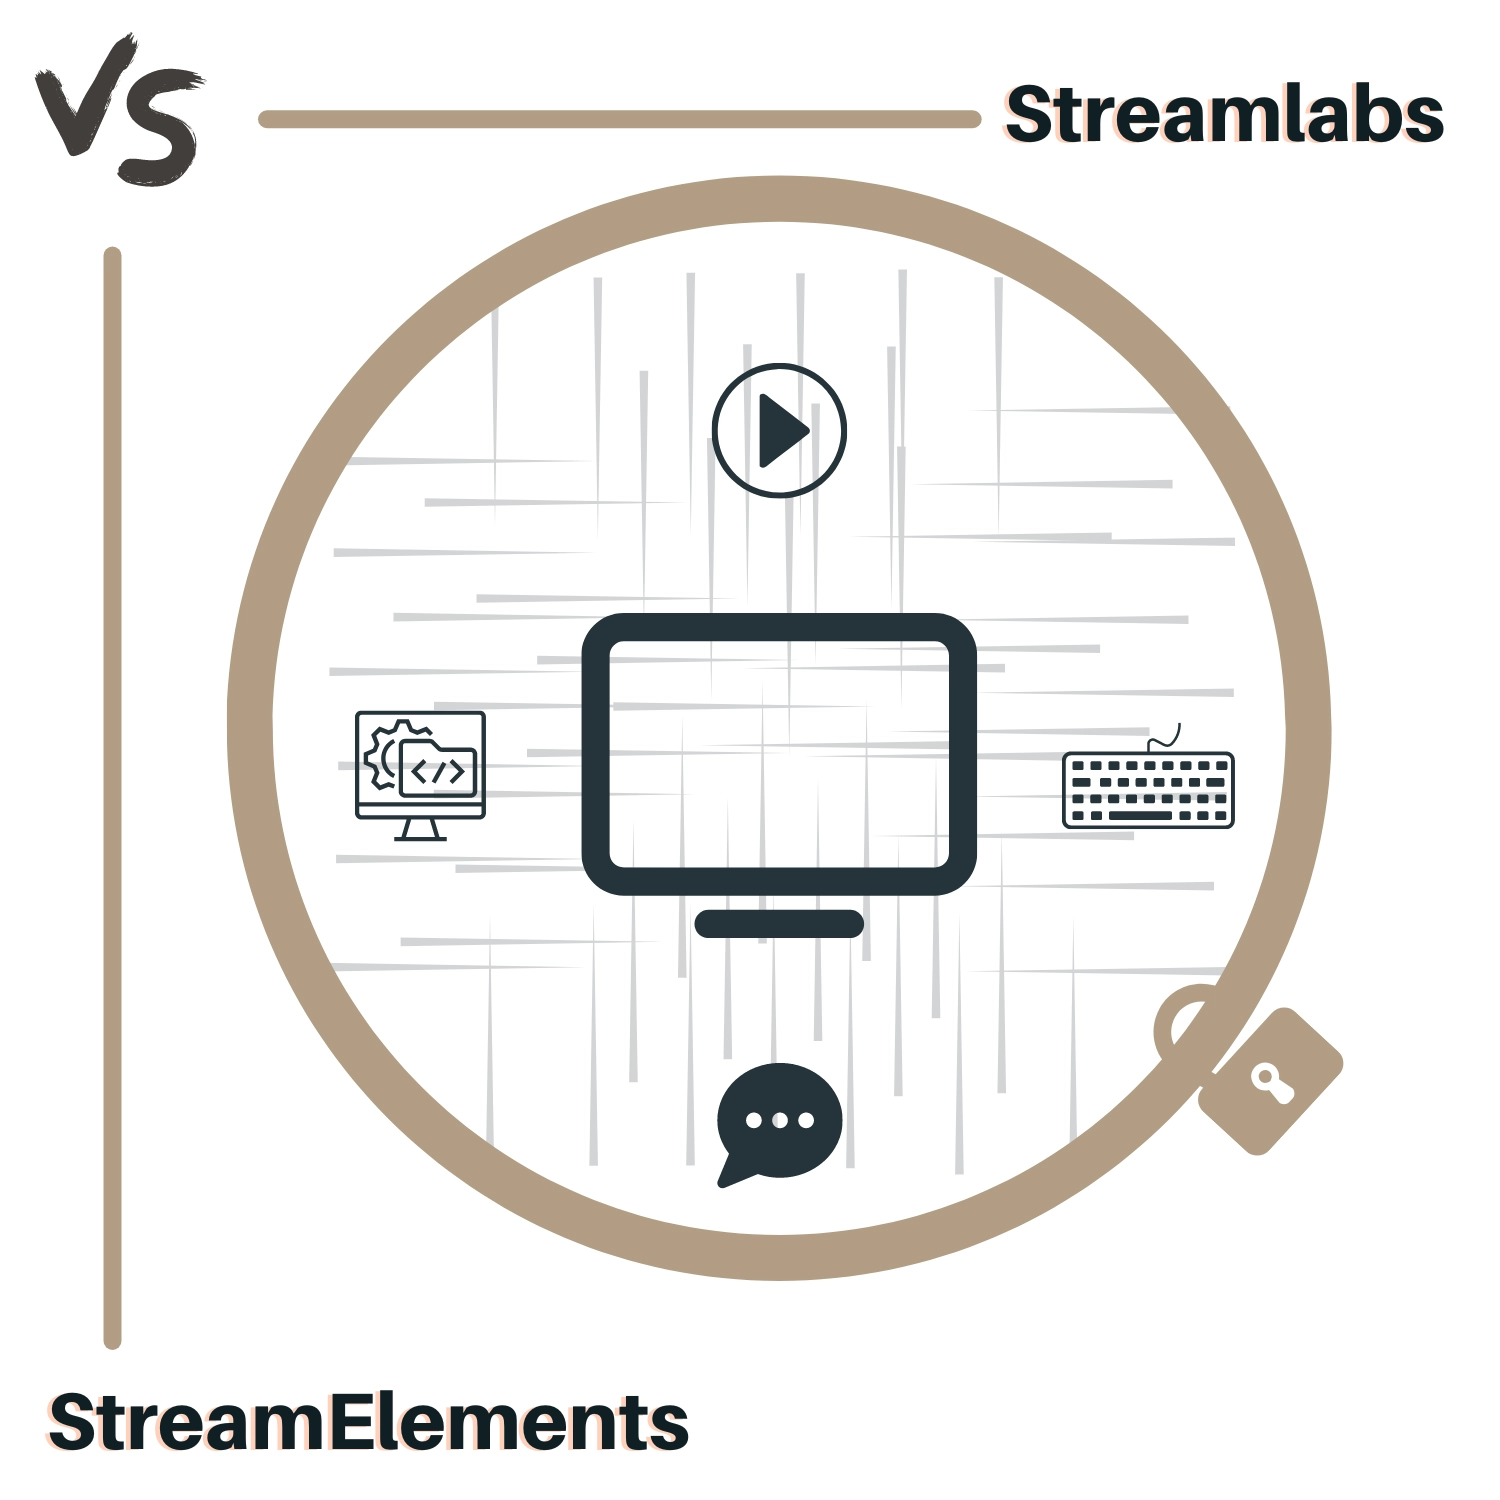 Streamlabs frente a StreamElements